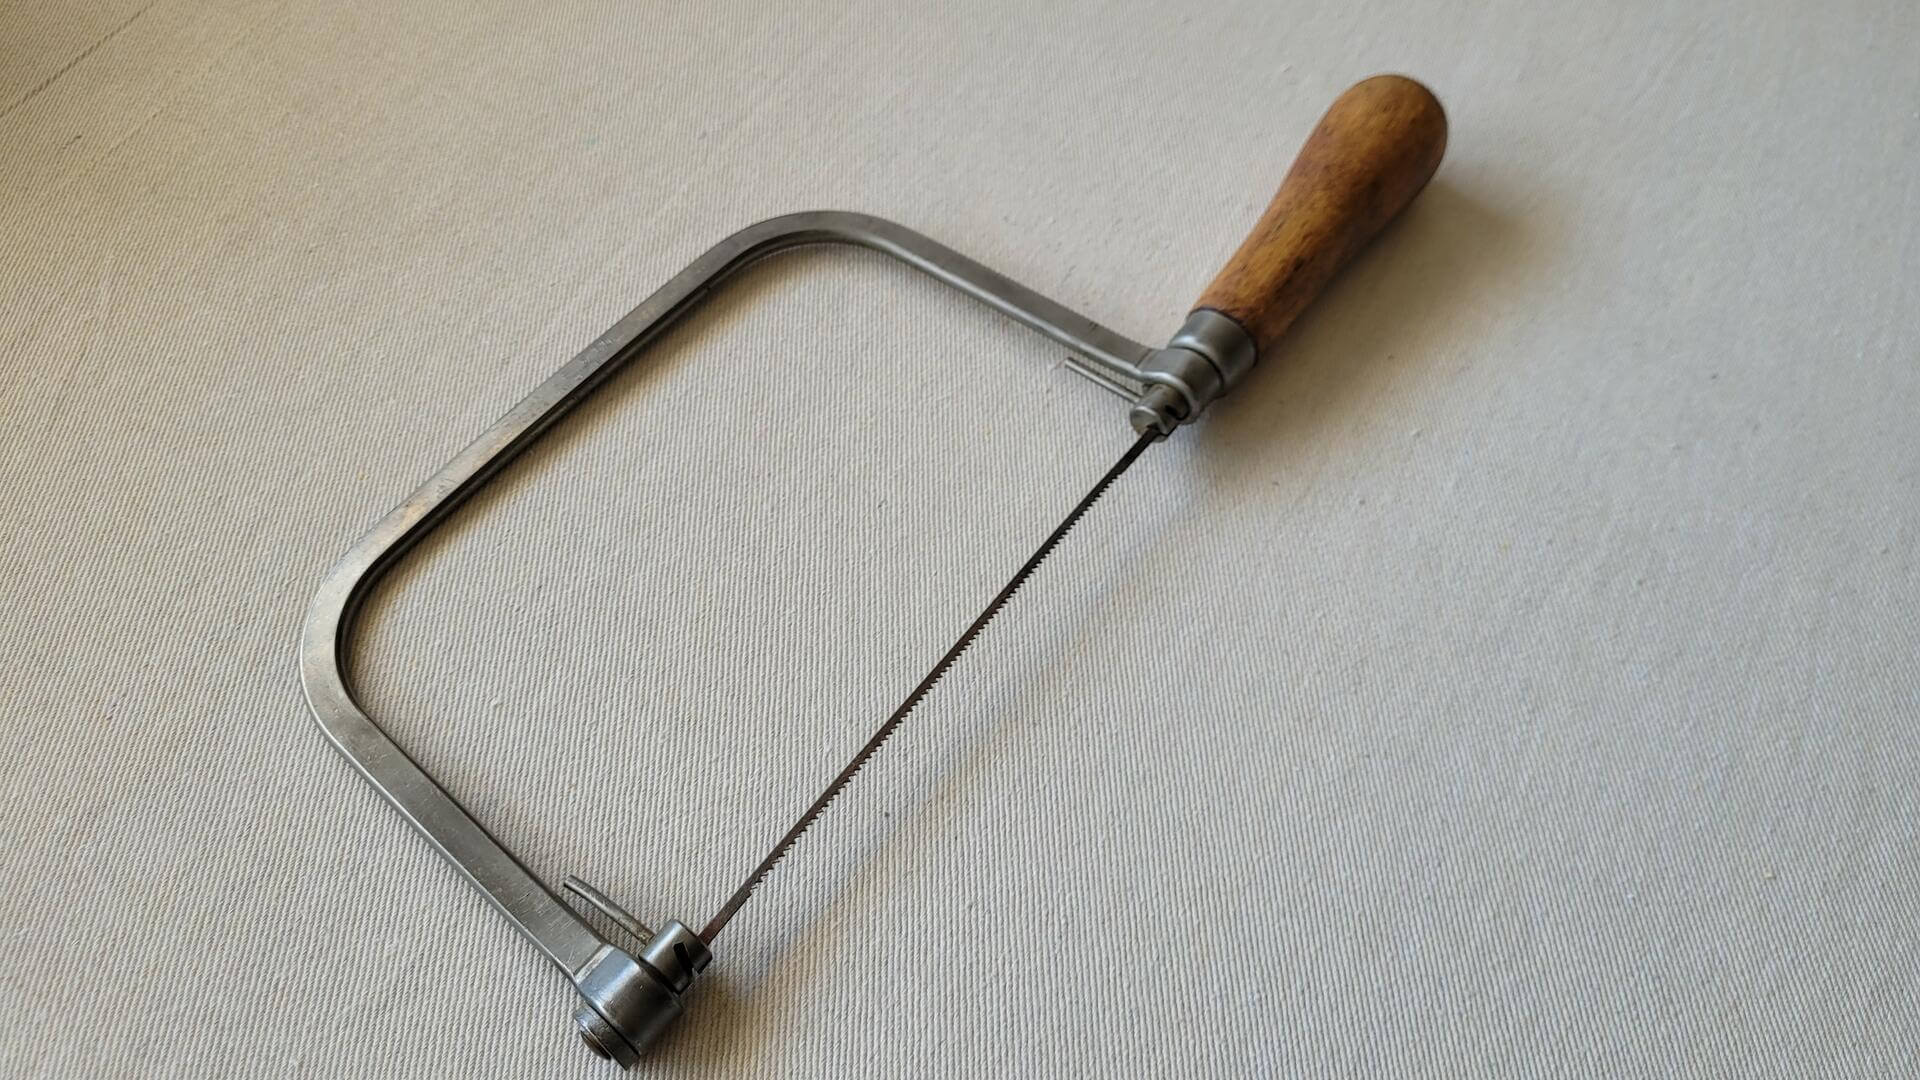 Vintage Trojan A.S. & Co. scroll coping saw by Parker Manufacturing Company from Worchester, Mass. Rare antique made in USA collectible hand tools